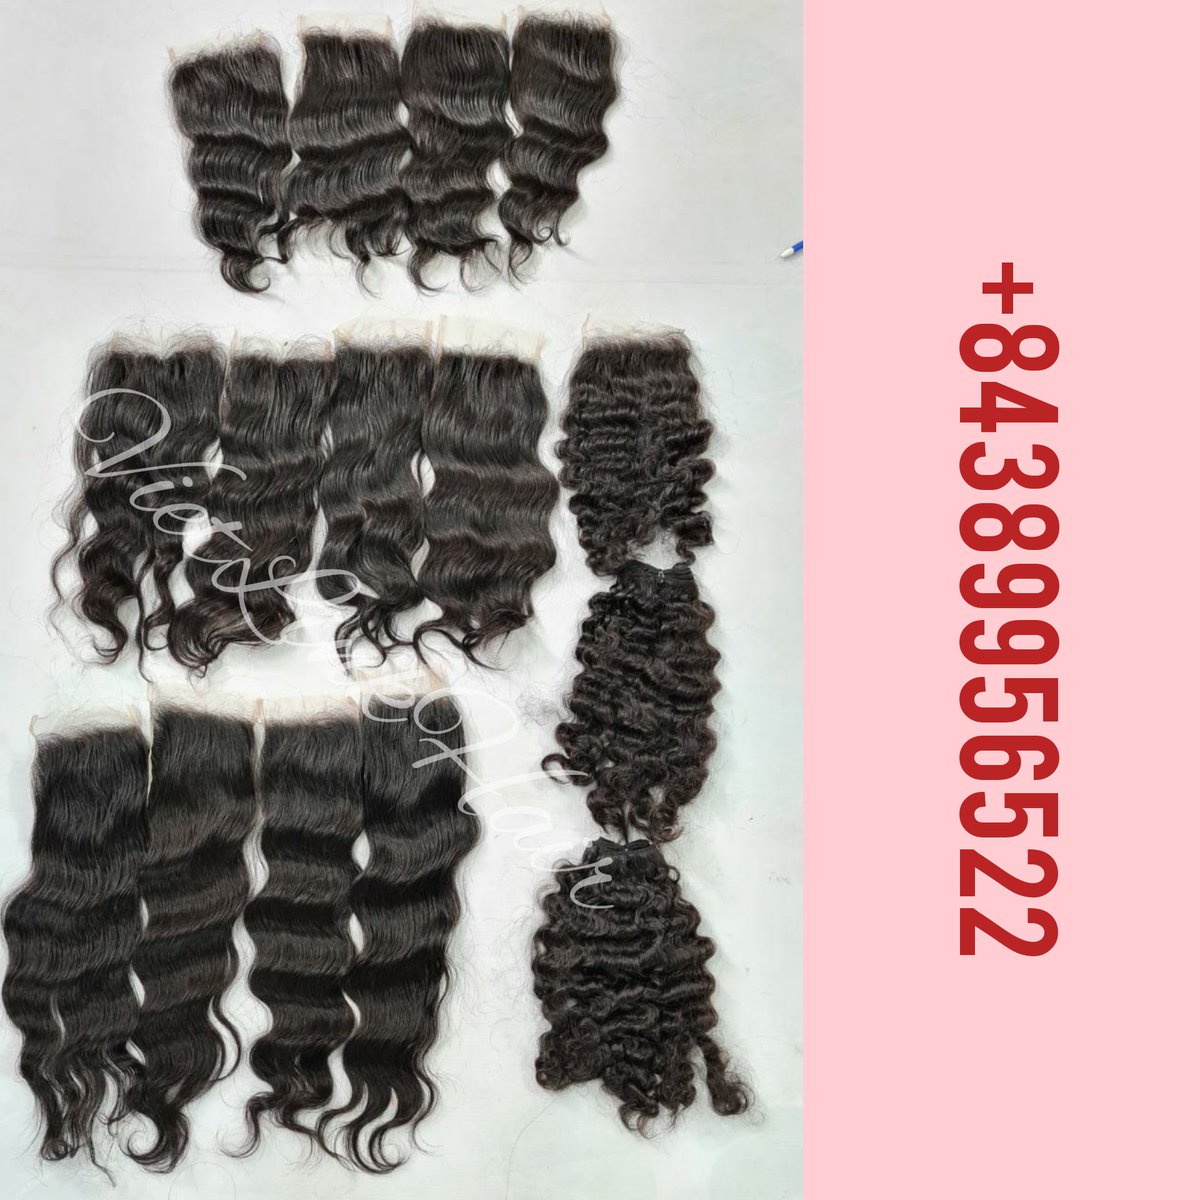 ❤️Our laces are coming in stock with all texture 🤫
💗Tell me right away to take them_they are being sold out very quickly💗
#laceclosure #rawhairvietnam #availablelaces #frontals  #closures #closuresewin #gluelessclosure  #hairfactoryinvietnam #rawhairfactory  #rawhairwholesale